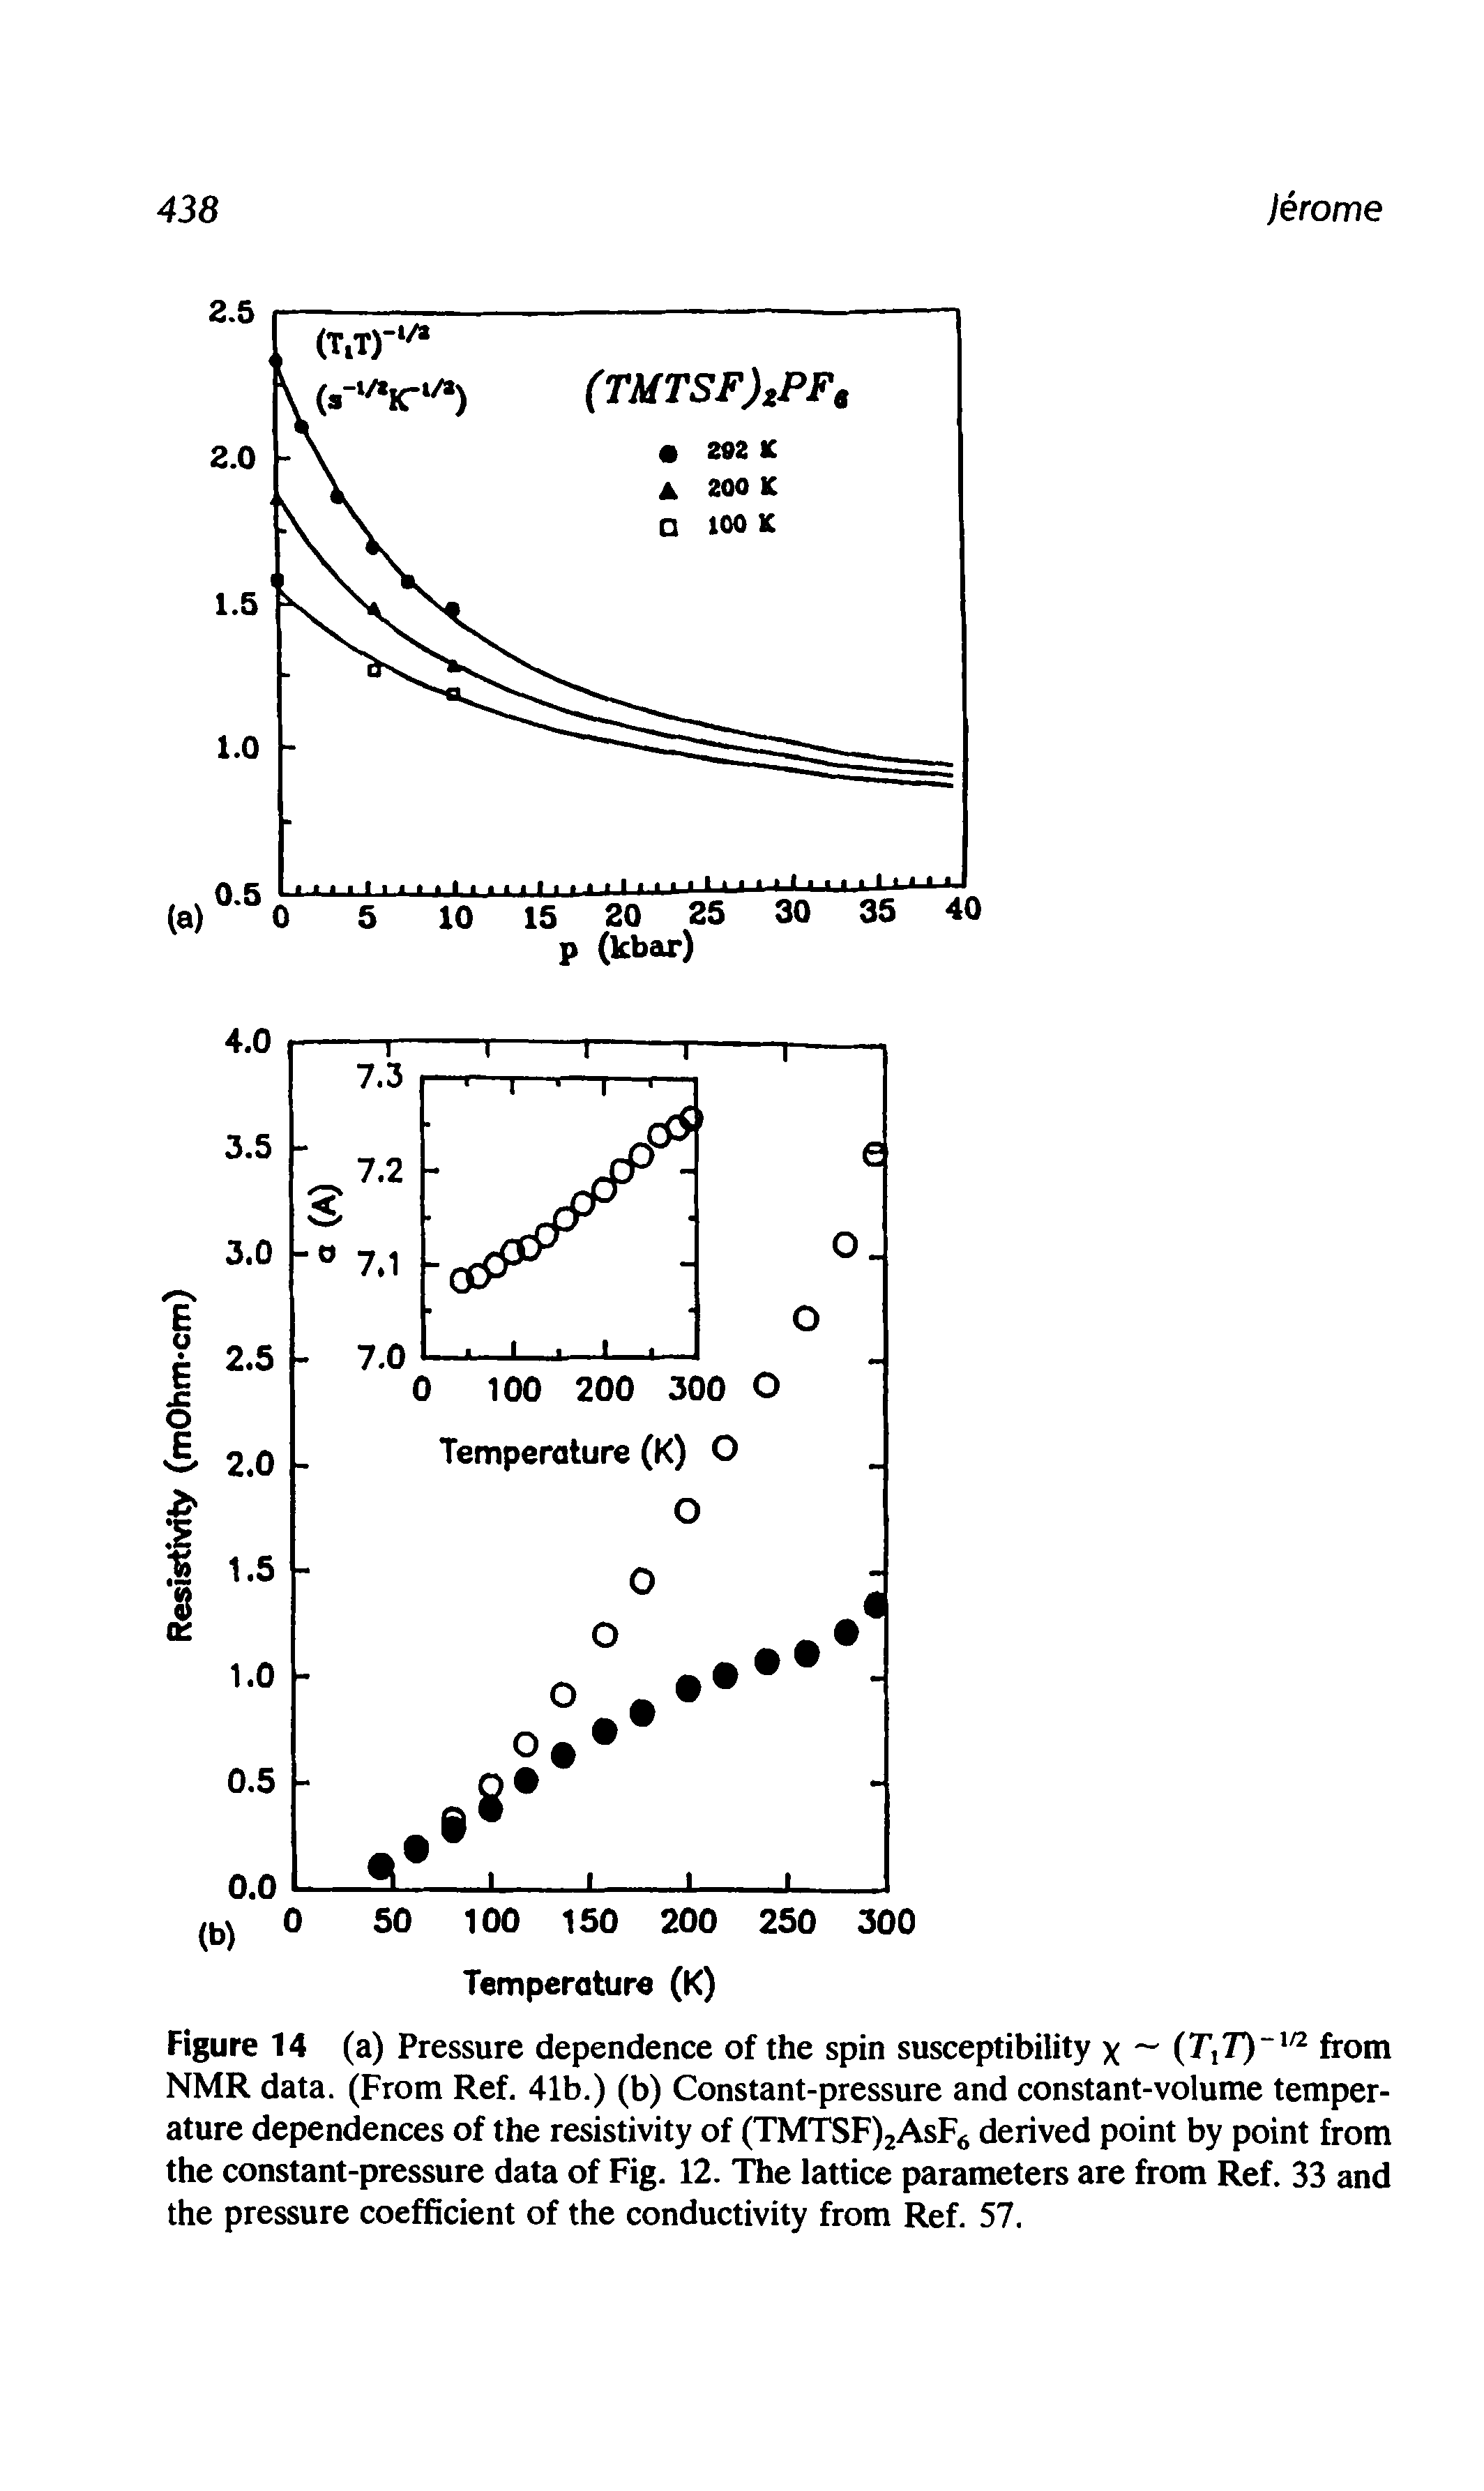 Figure 14 (a) Pressure dependence of the spin susceptibility x (T,T)-l/2 from NMR data. (From Ref. 41b.) (b) Constant-pressure and constant-volume temperature dependences of the resistivity of (TMTSF)2AsF6 derived point by point from the constant-pressure data of Fig. 12. The lattice parameters are from Ref. 33 and the pressure coefficient of the conductivity from Ref. 57.